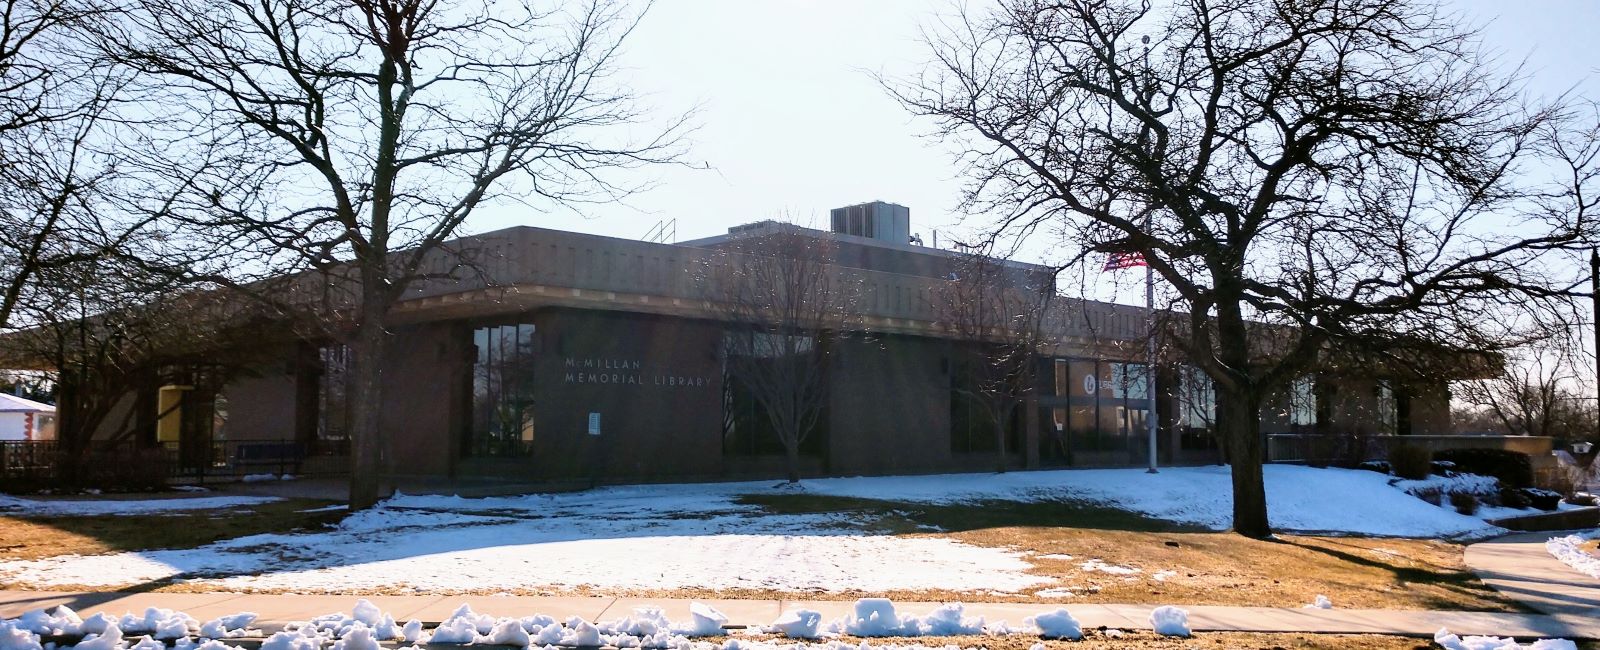 Solar Panel Array on McMillan Memorial Library Roof May Be Removed